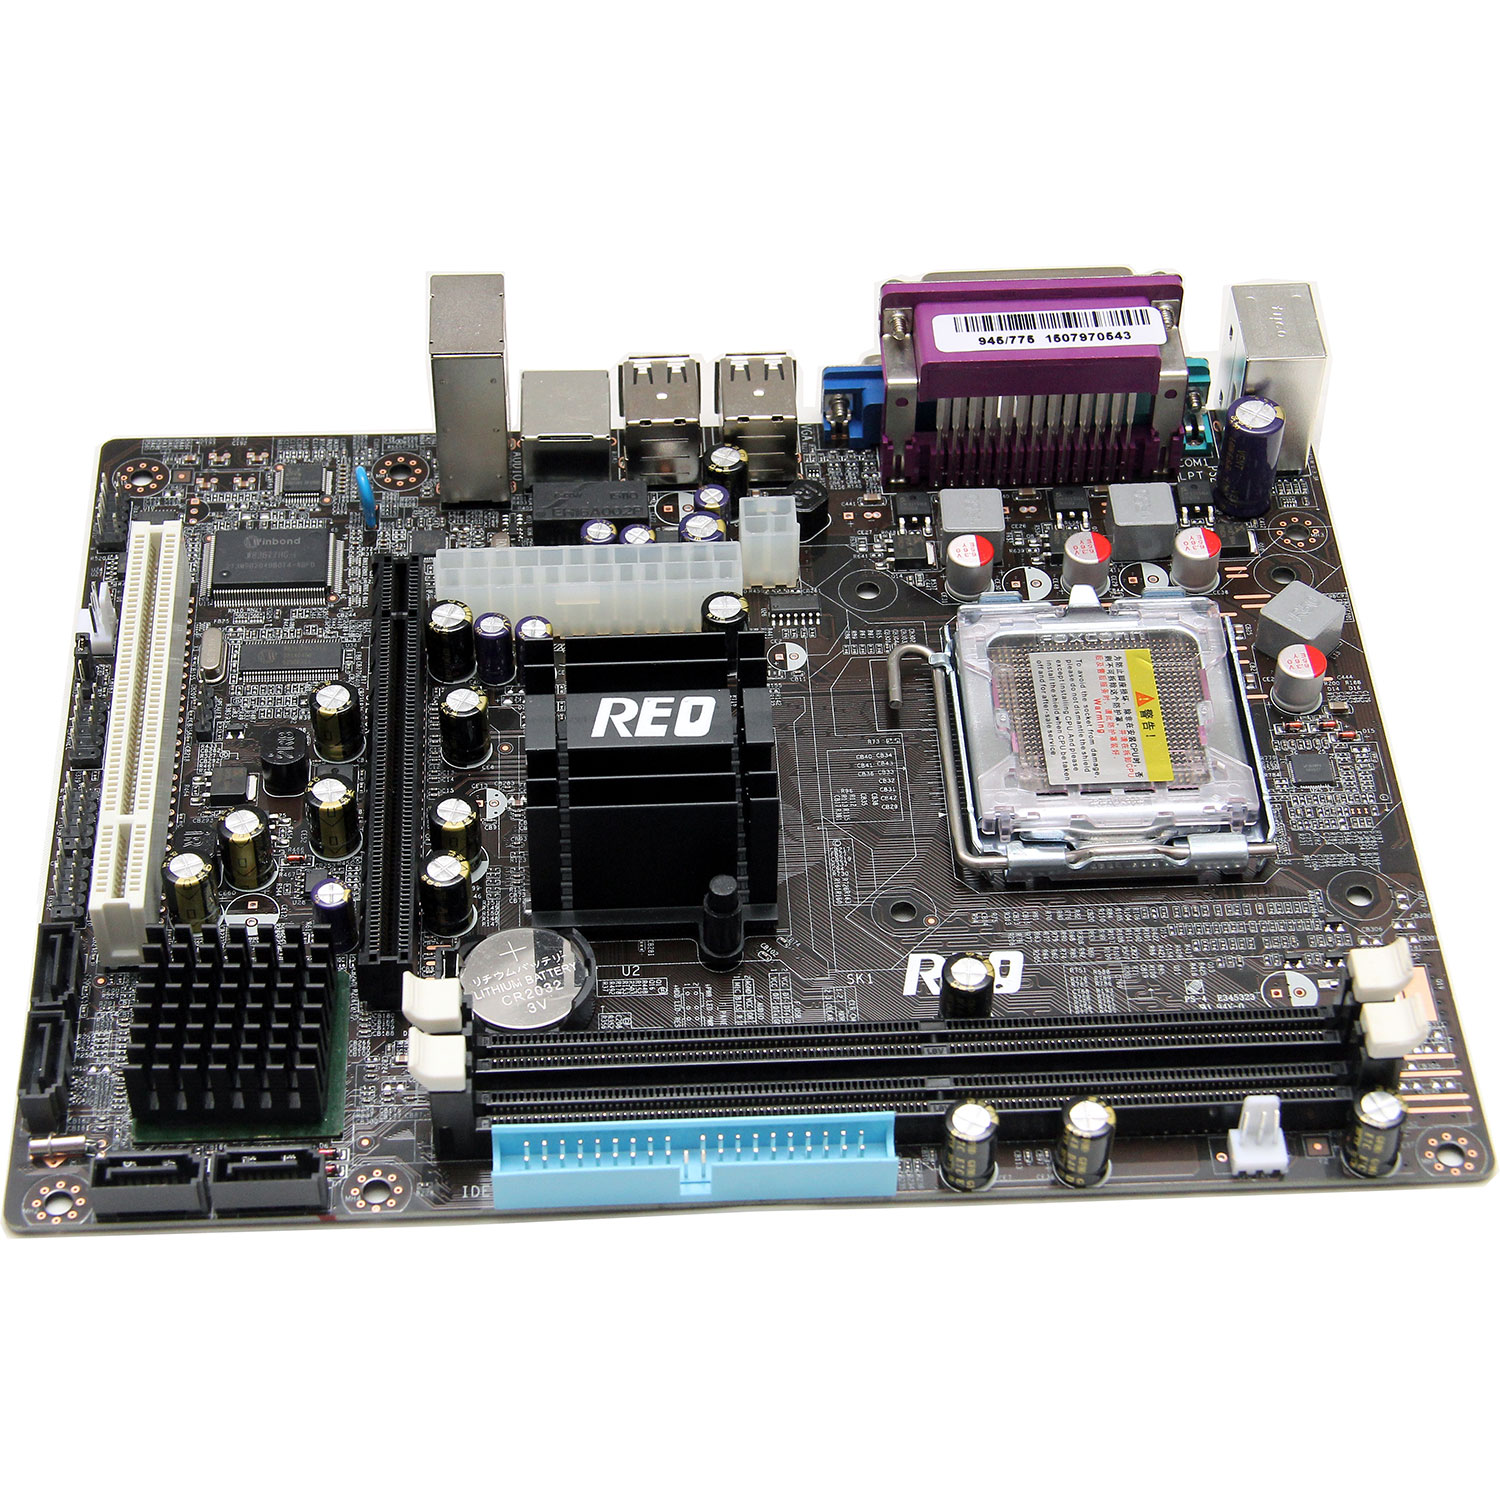 Gsonic 915 Motherboard Usb Drivers Windows 7 - fasrscout